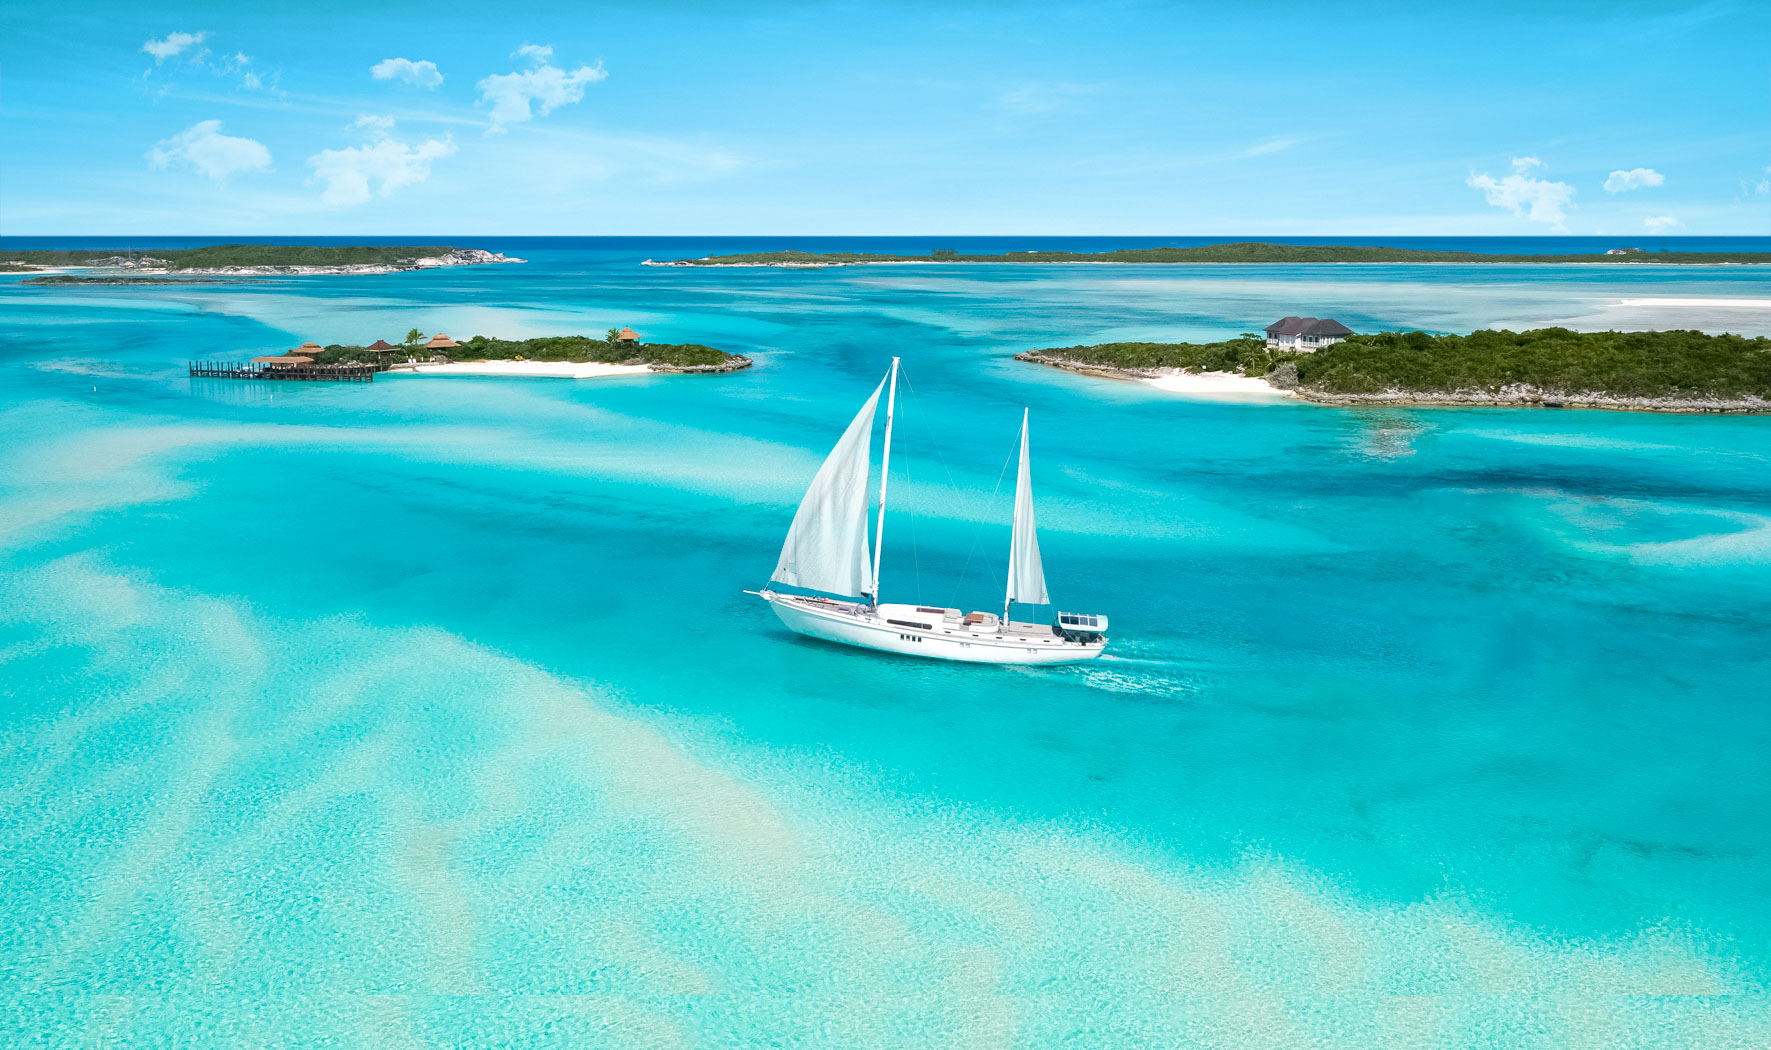 A white sailboat navigates clear turquoise waters near small, lush islands under a blue sky with a few clouds.